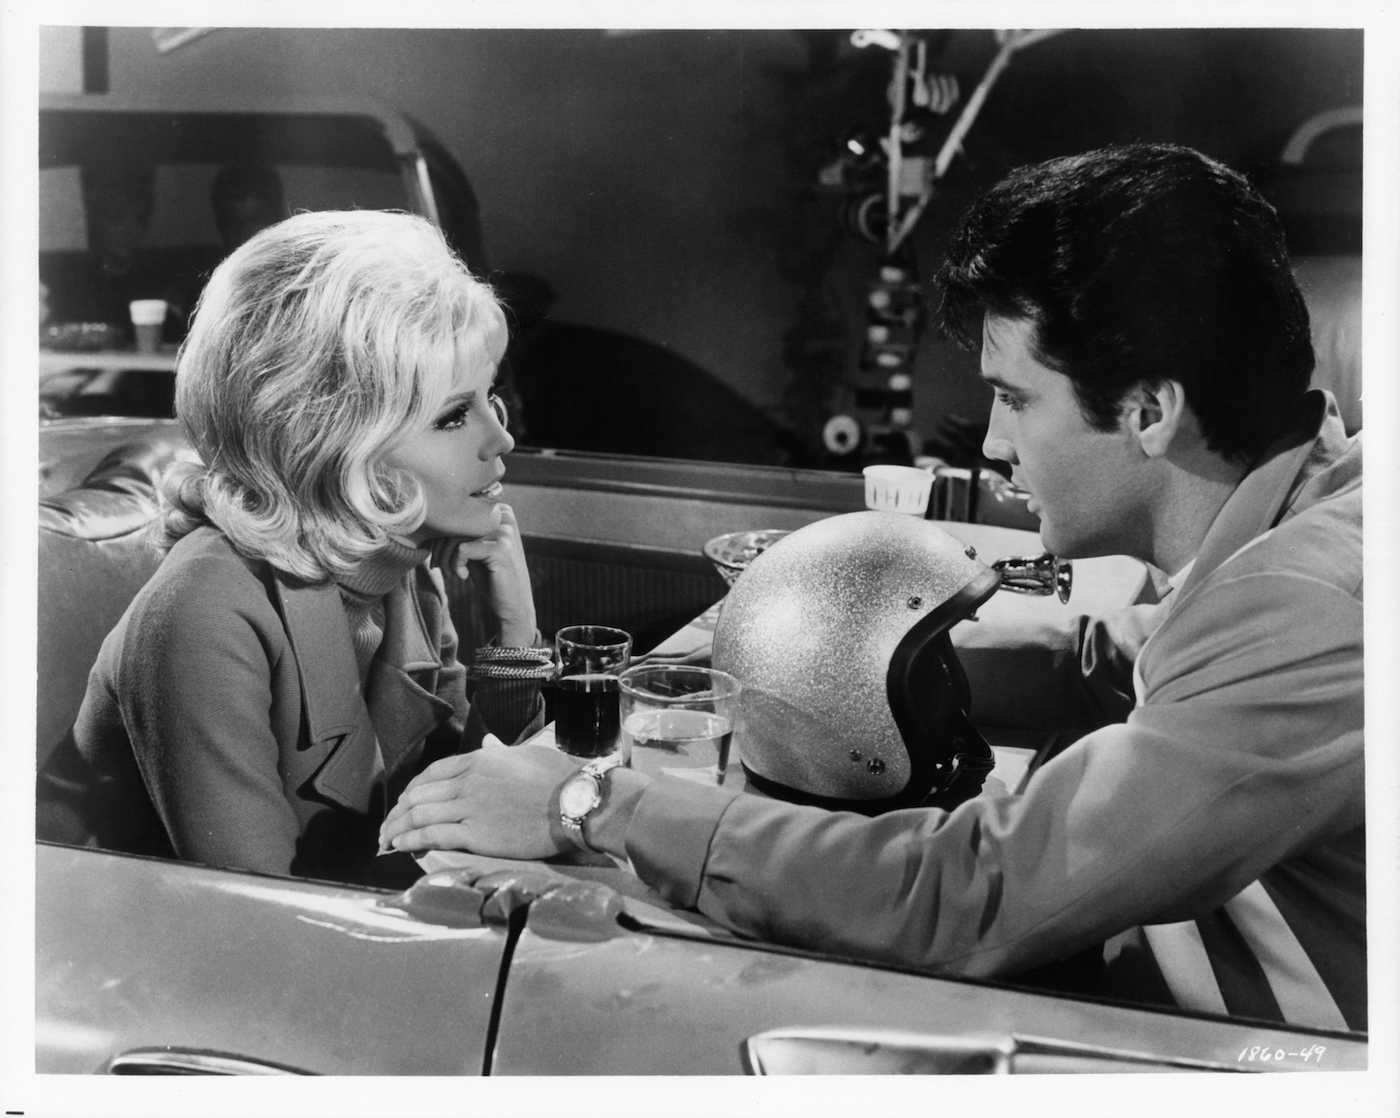 Nancy Sinatra and Elvis Presley eat in the car together in a scene from the film 'Speedway'